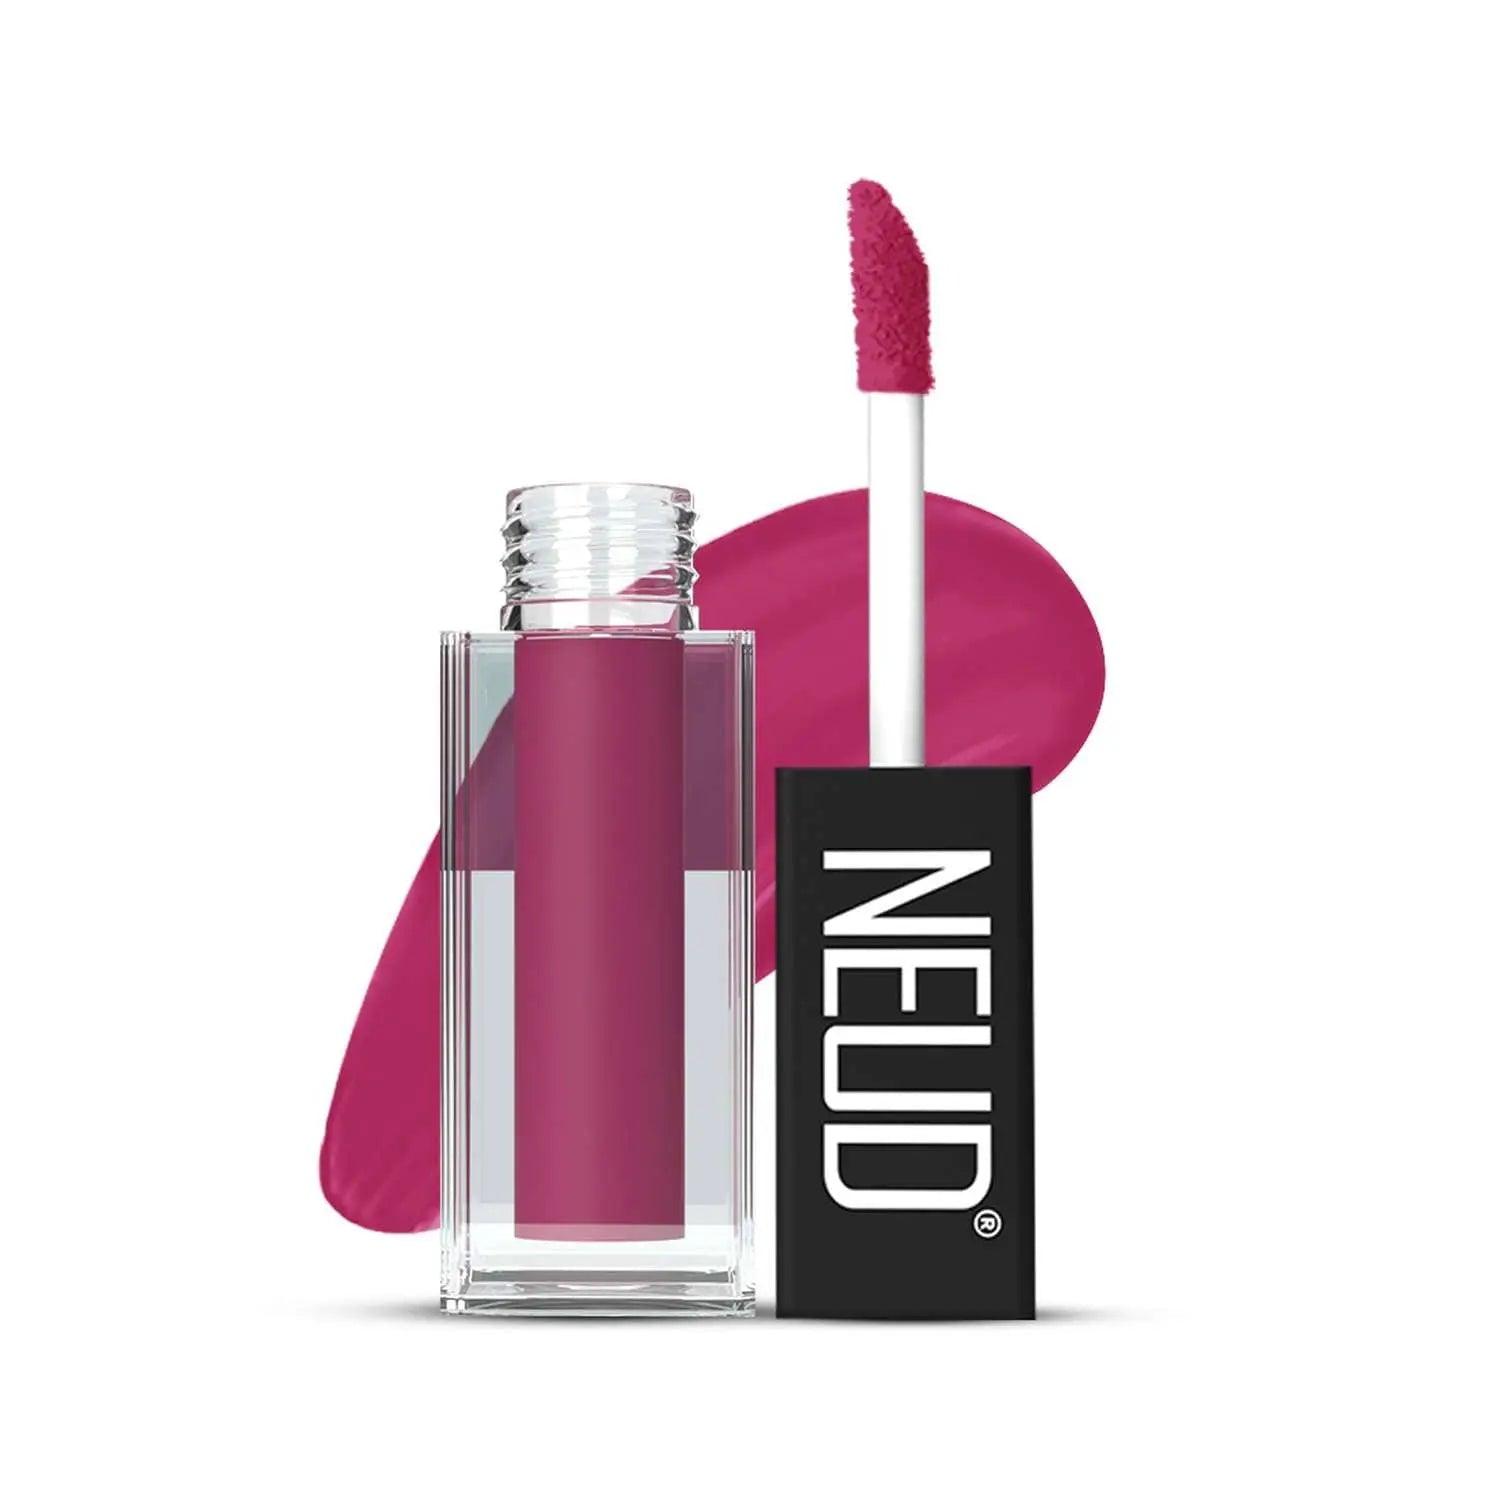 NEUD Matte Liquid Lipstick Quirky Tease with Jojoba Oil, Vitamin E and Almond Oil - Smudge Proof 12-hour Stay Formula with Free Lip Gloss